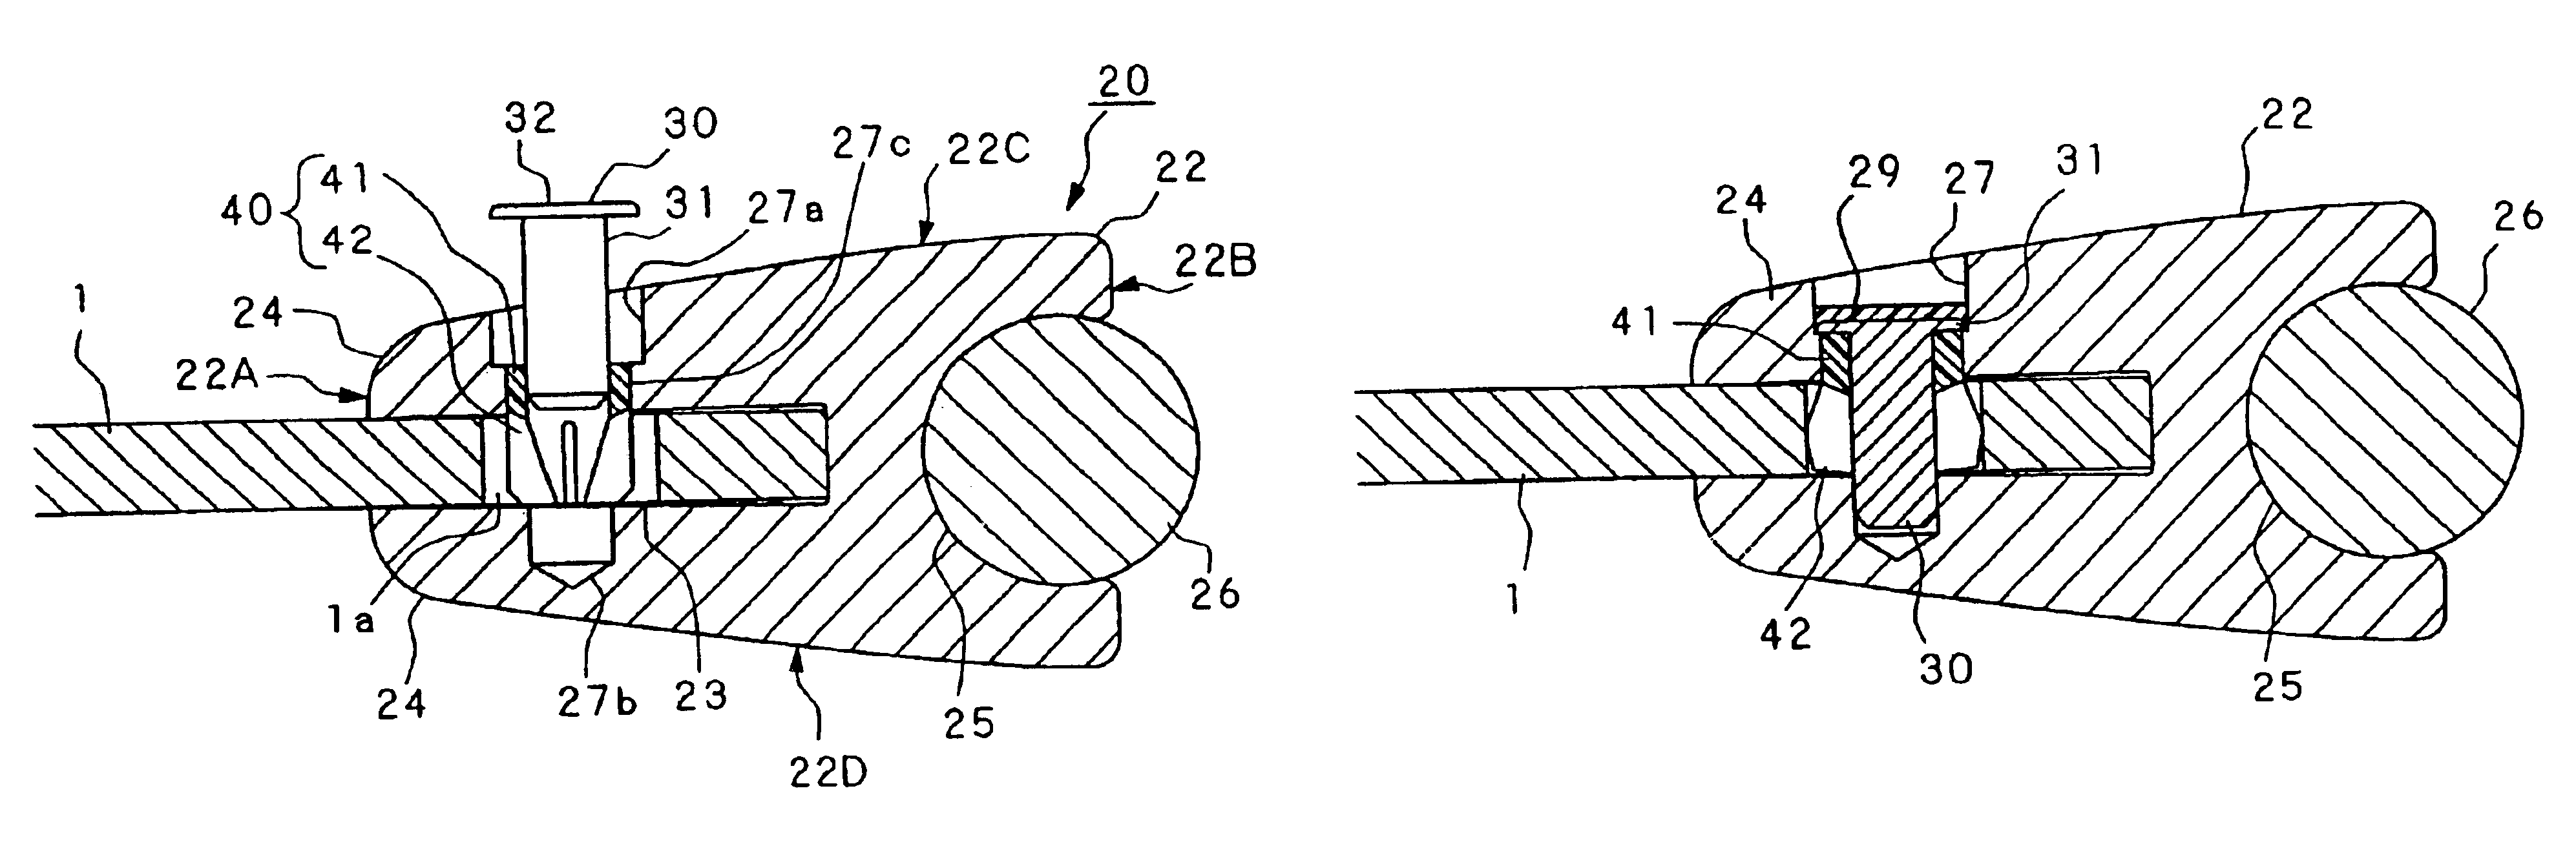 Edge insulating member for electrode plate, method of locking and unlocking the edge insulating member, and edge insulating member installation jig